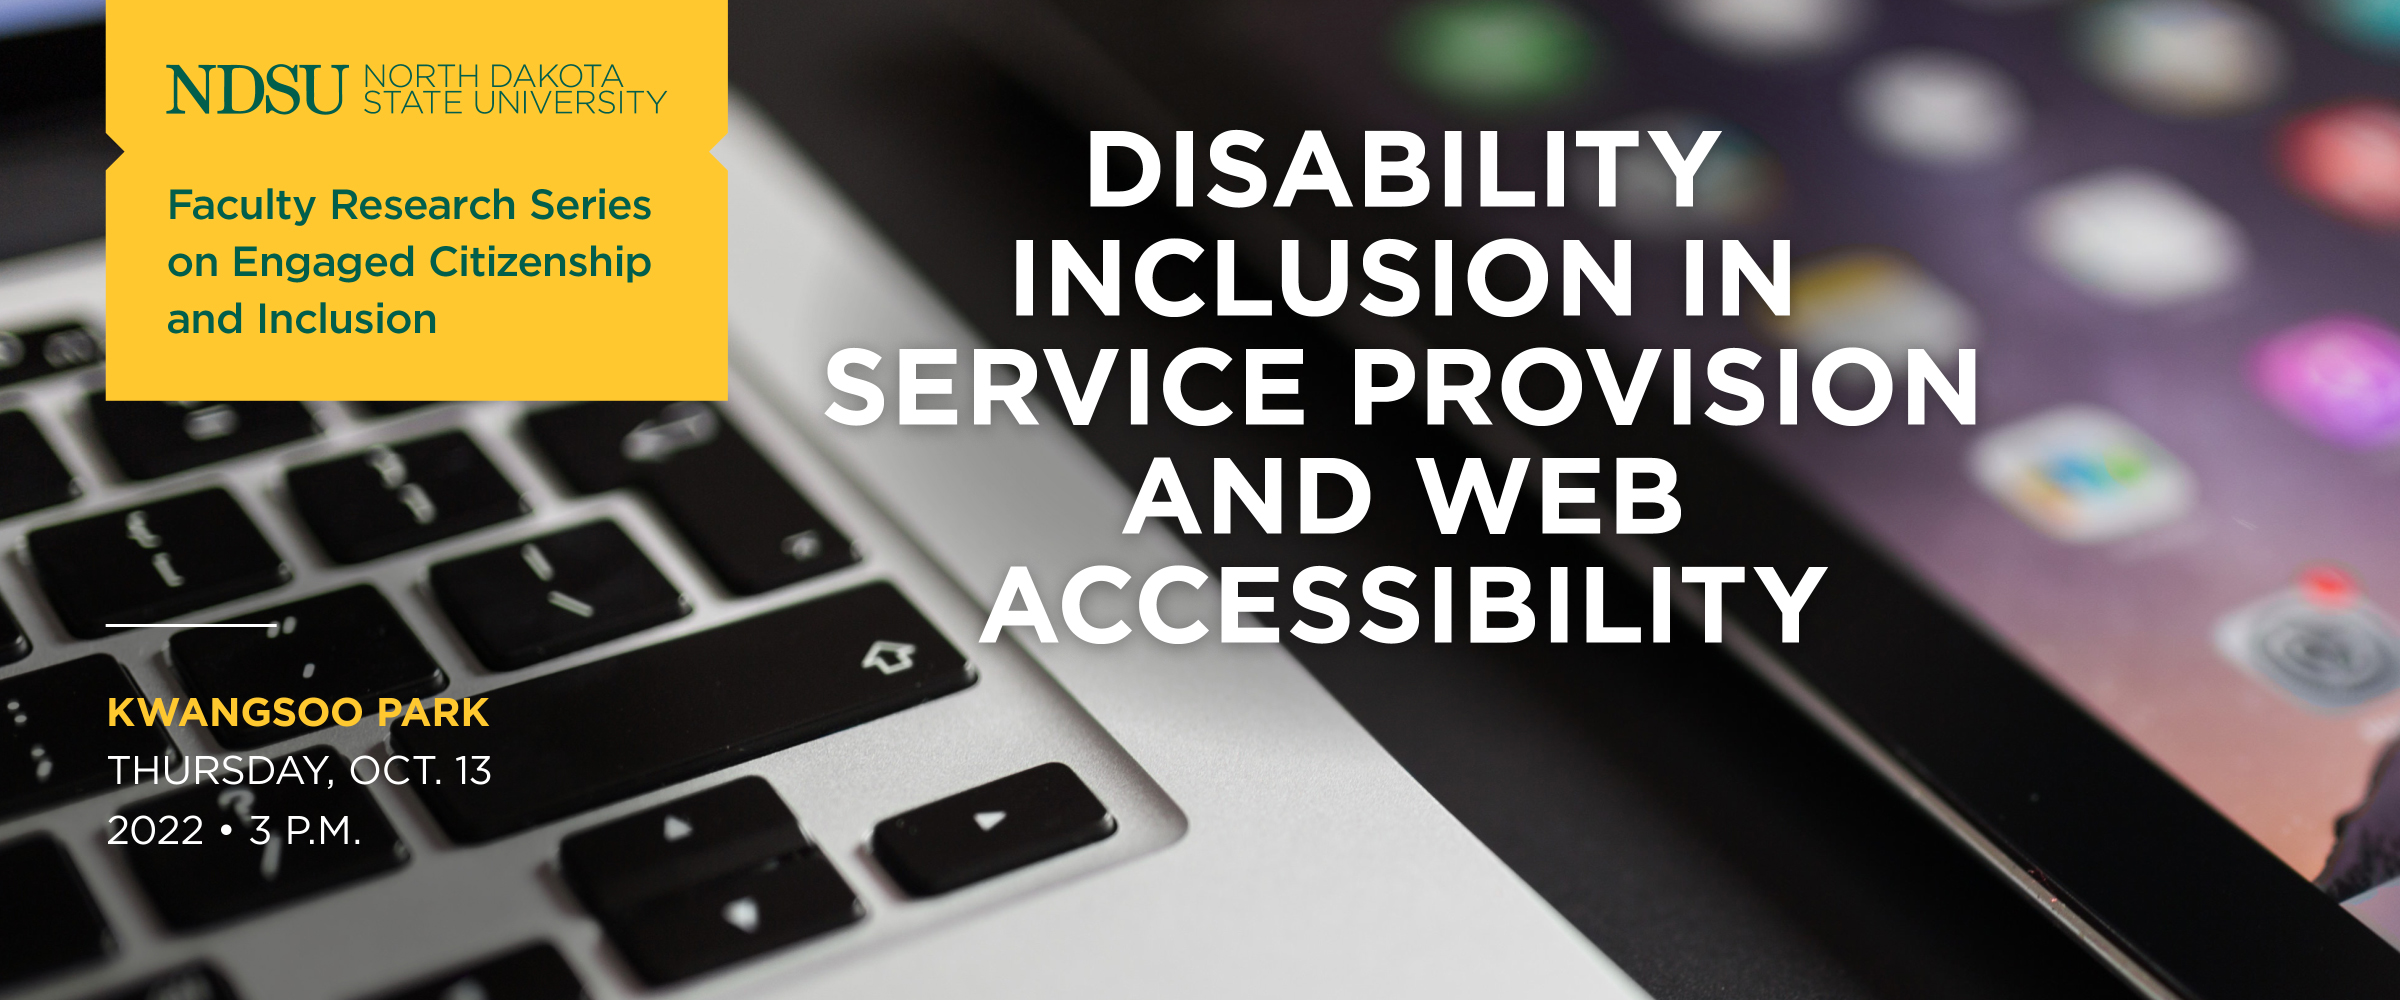 "Faculty Research Series on Engaged Citizenship, program titled Disability Inclusion in Service Provision and Web Accessibility by Kwangsoo Park, Thursday October 13th, 2022 at 3 pm"